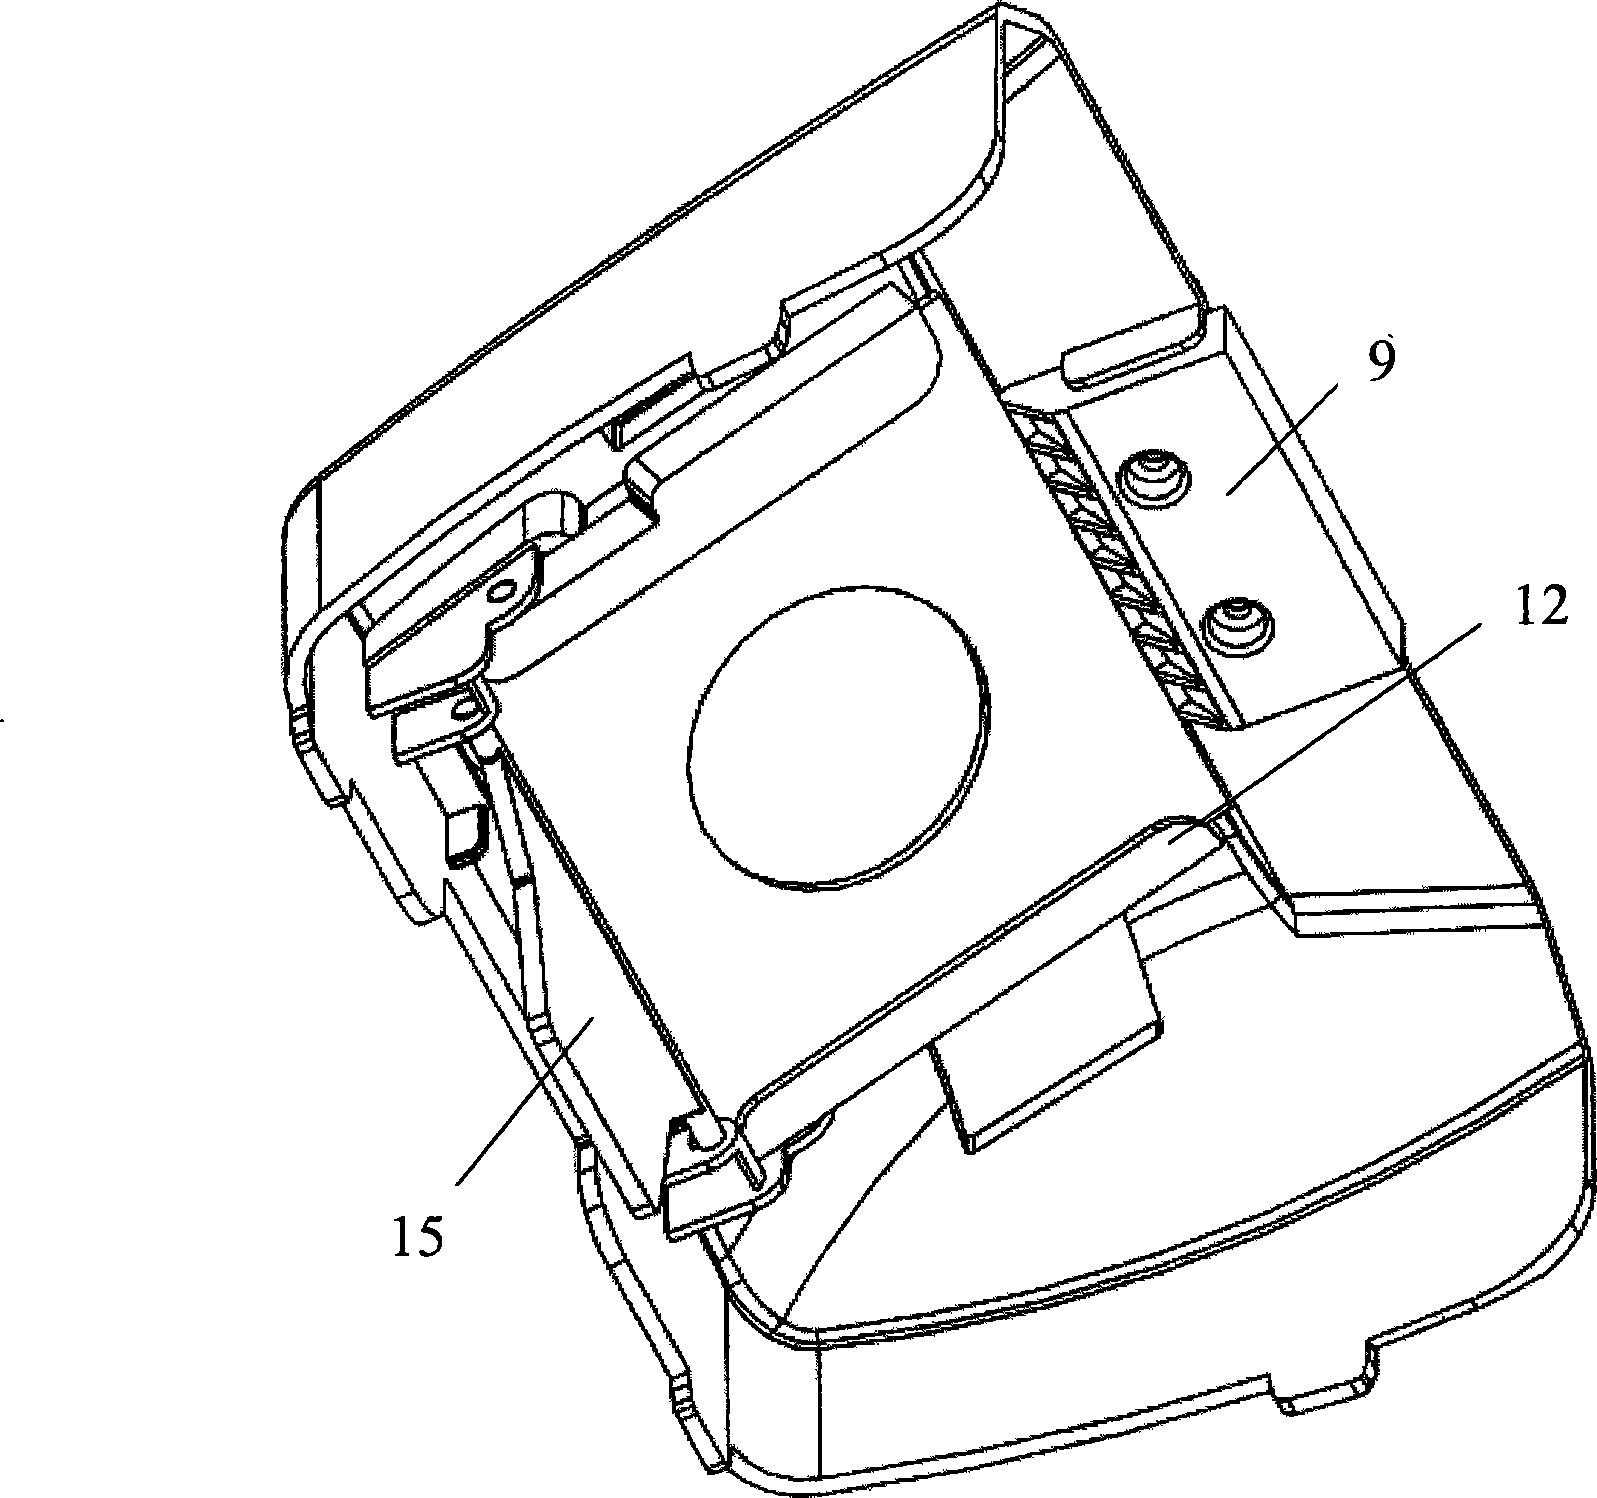 Cloth bag frame with dust collecting bag capable of being popped automatically